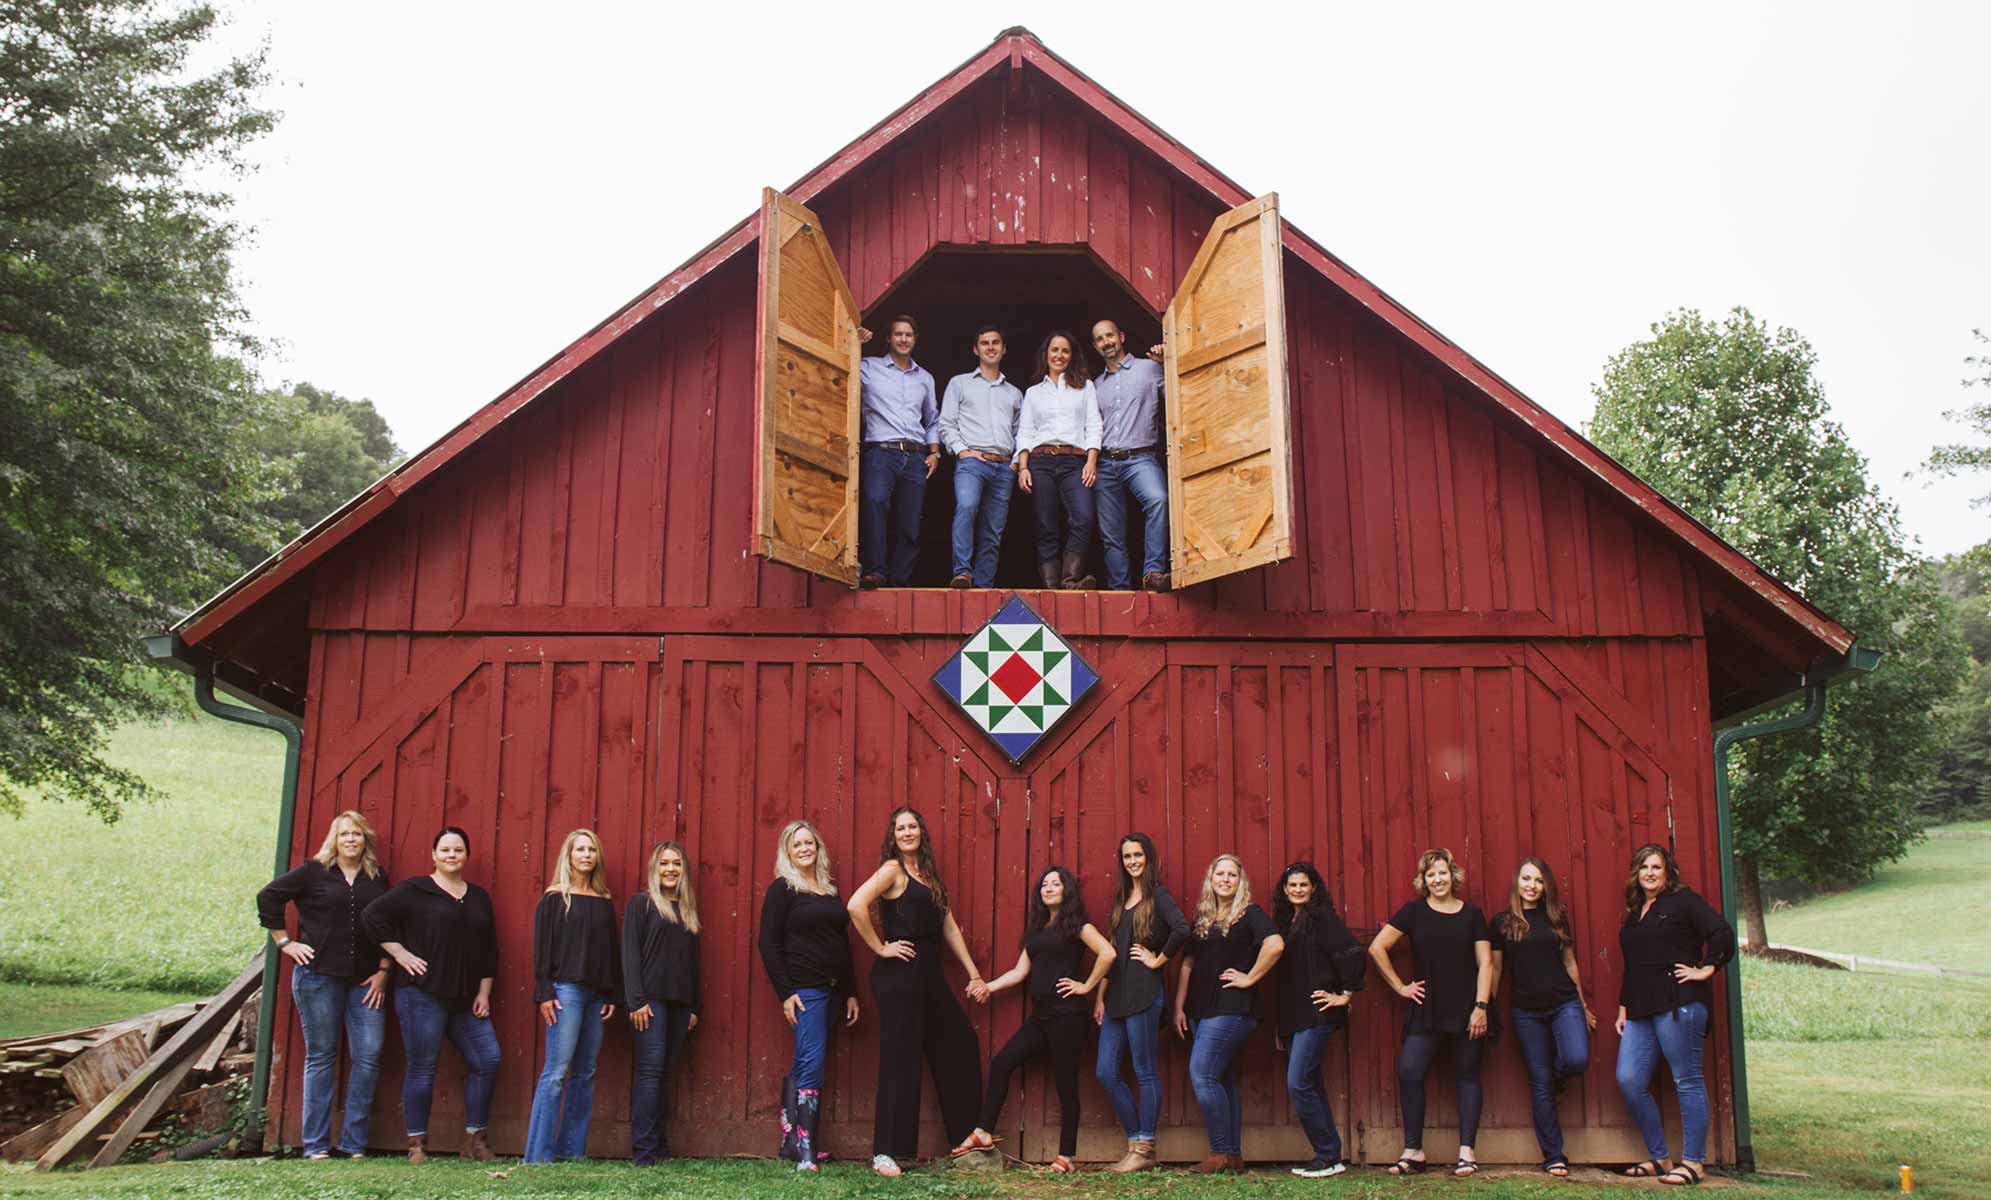 Smoky Mountain Dentistry Staff in front of a barn in Waynesville, NC